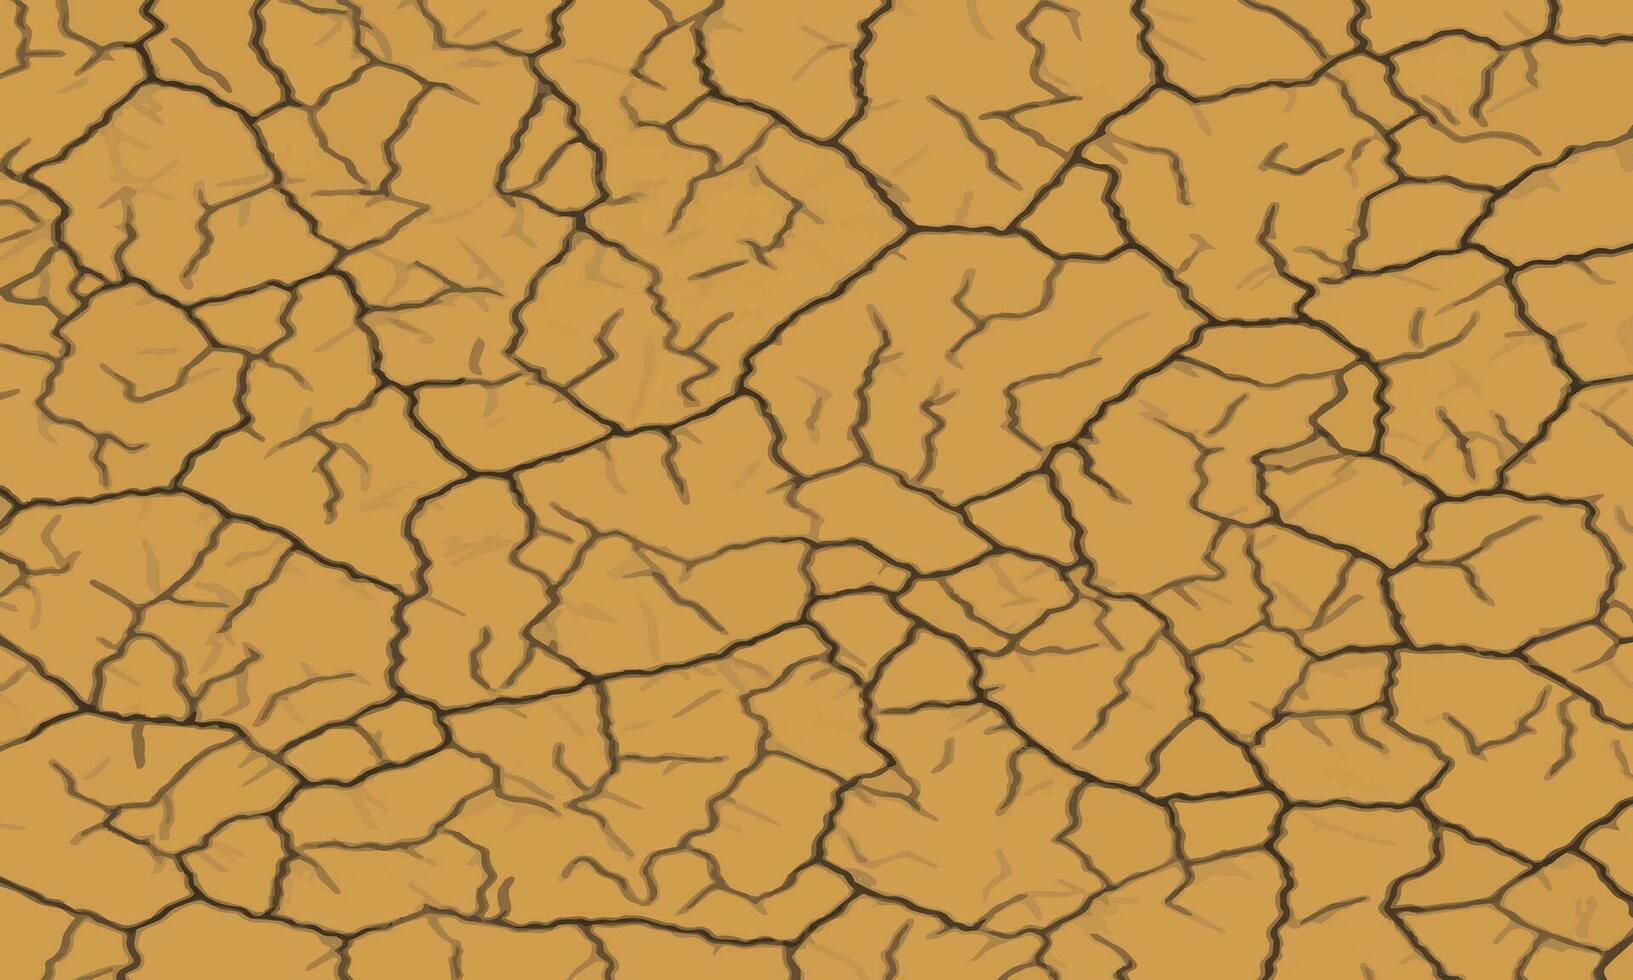 Dry soil brown surface cracked ground texture background. dry soil surface cracked ground texture vector